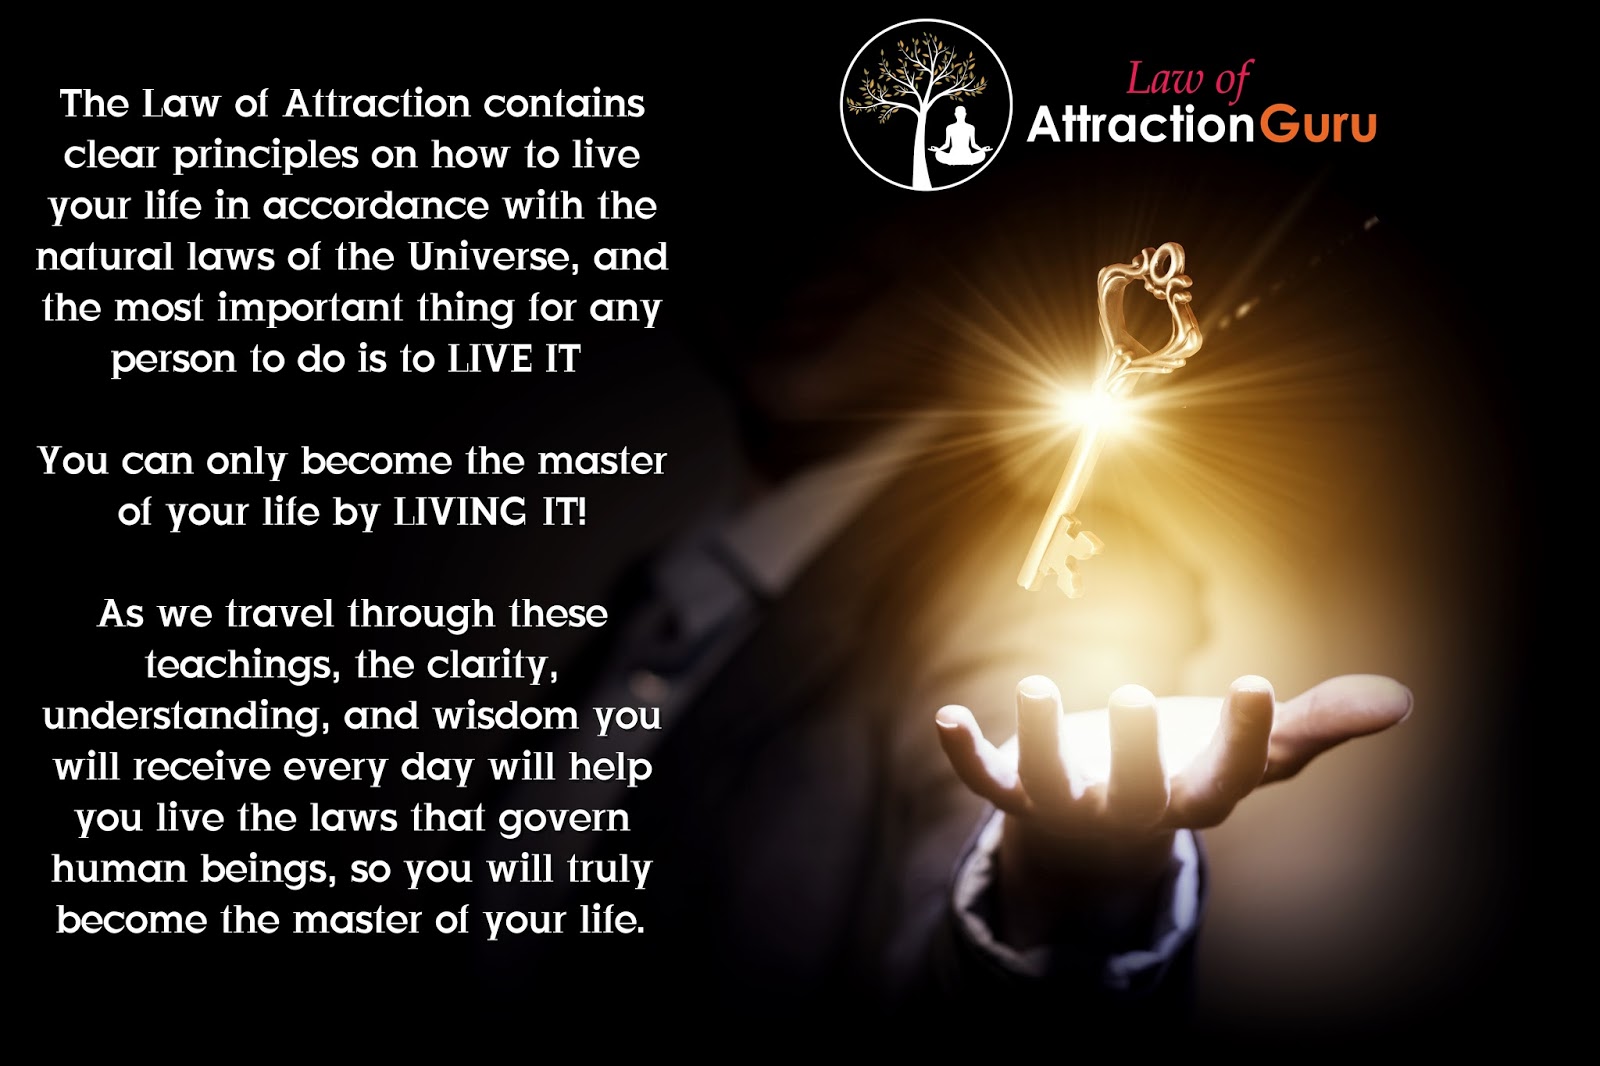 What is law of attraction.